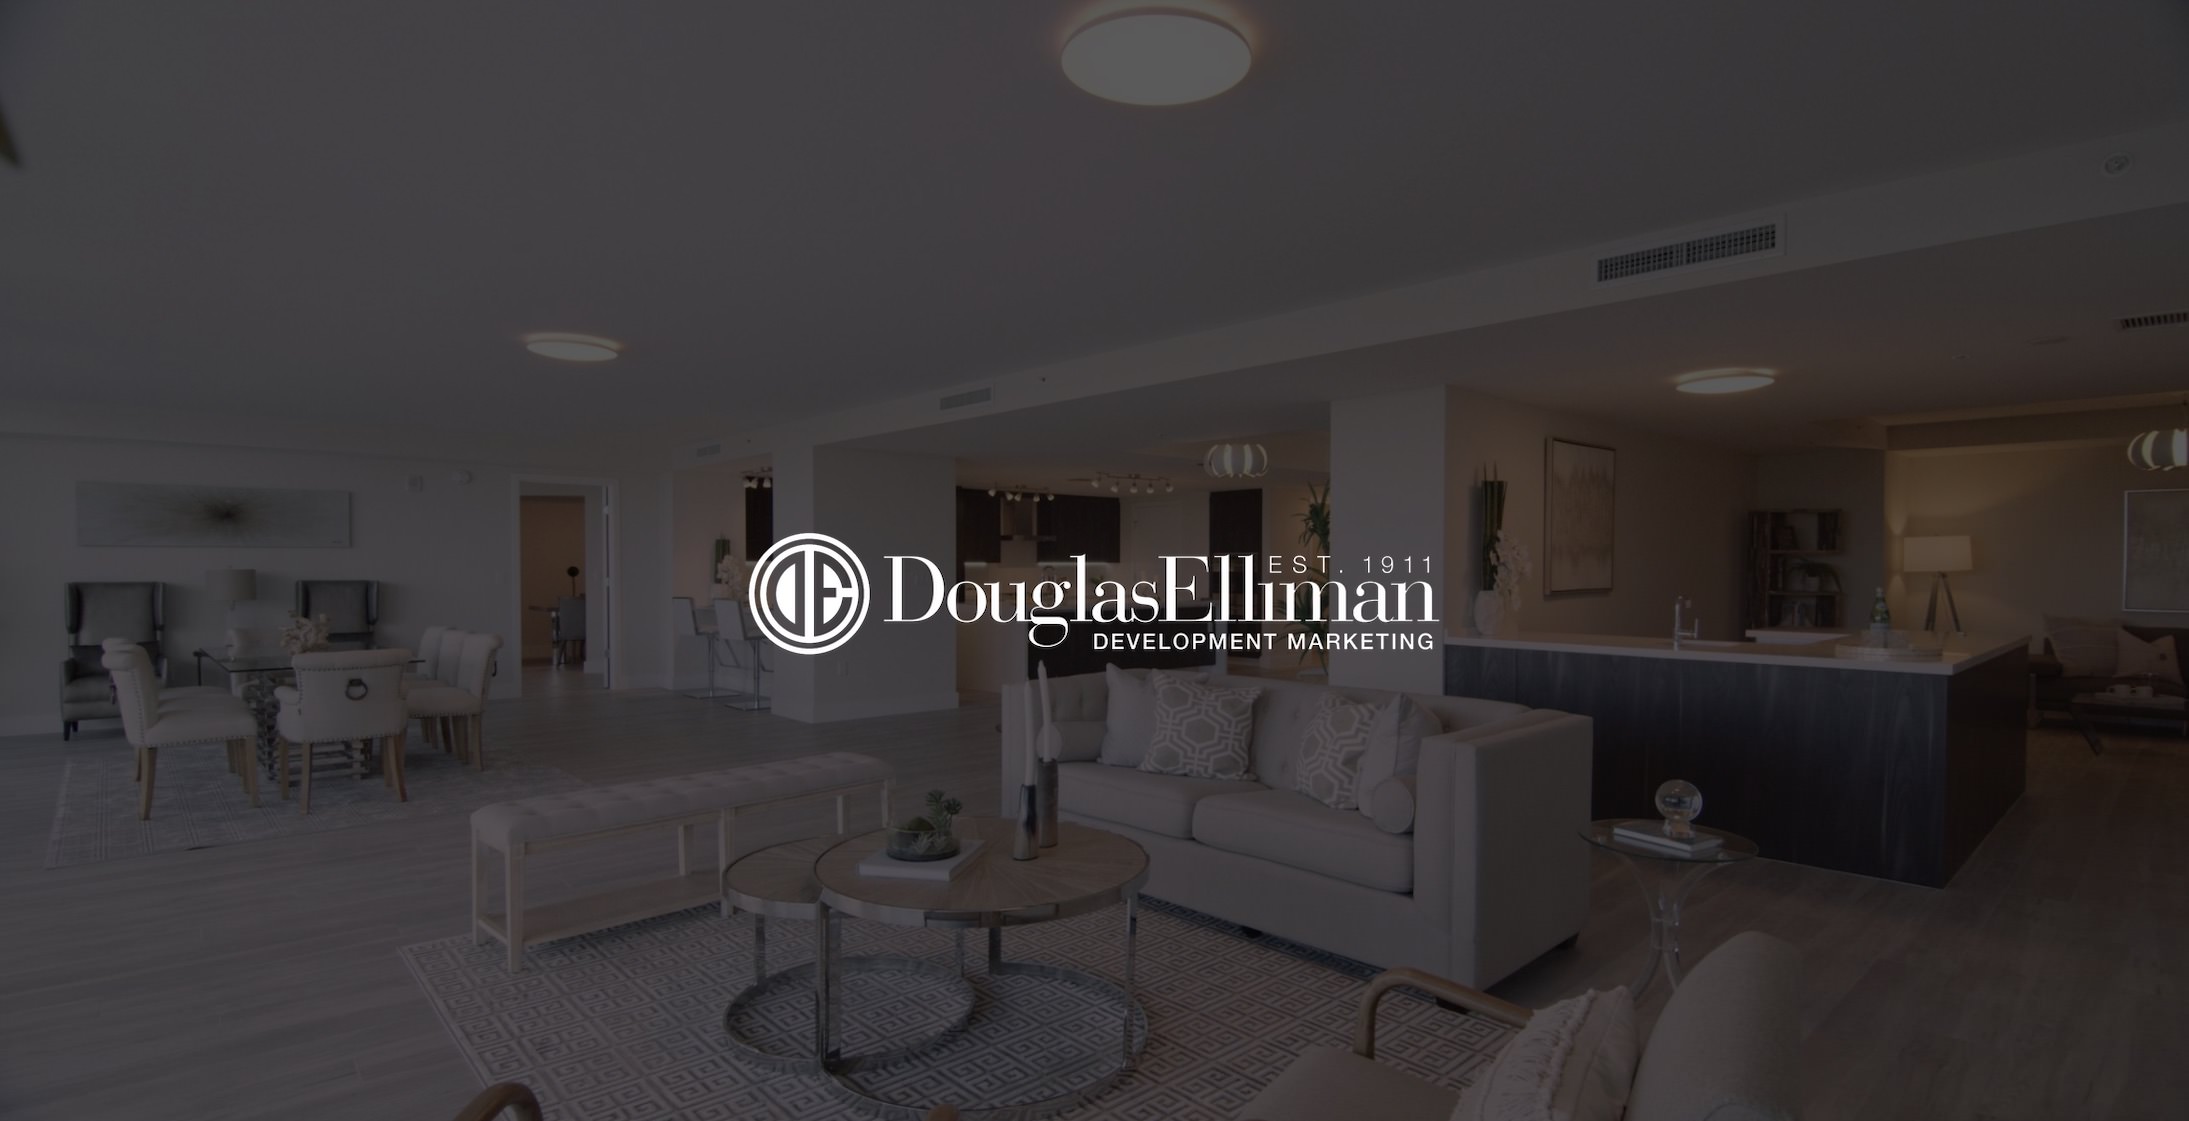 White Douglas Elliman Development Marketing title Truly Great Homes on dimmed background of interior of a house